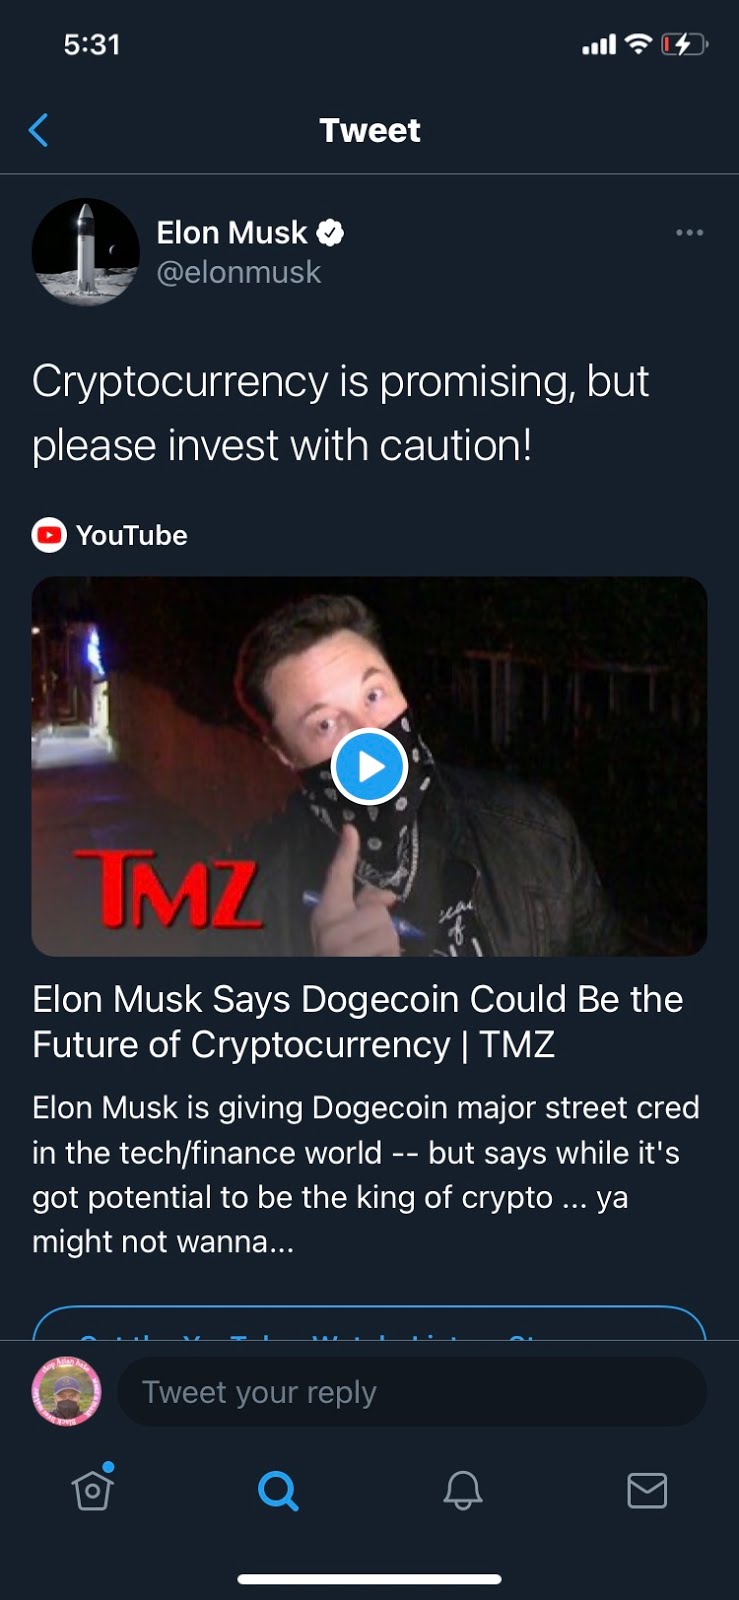 Elon Musk: Dogecoin could be the future of cryptocurrency.